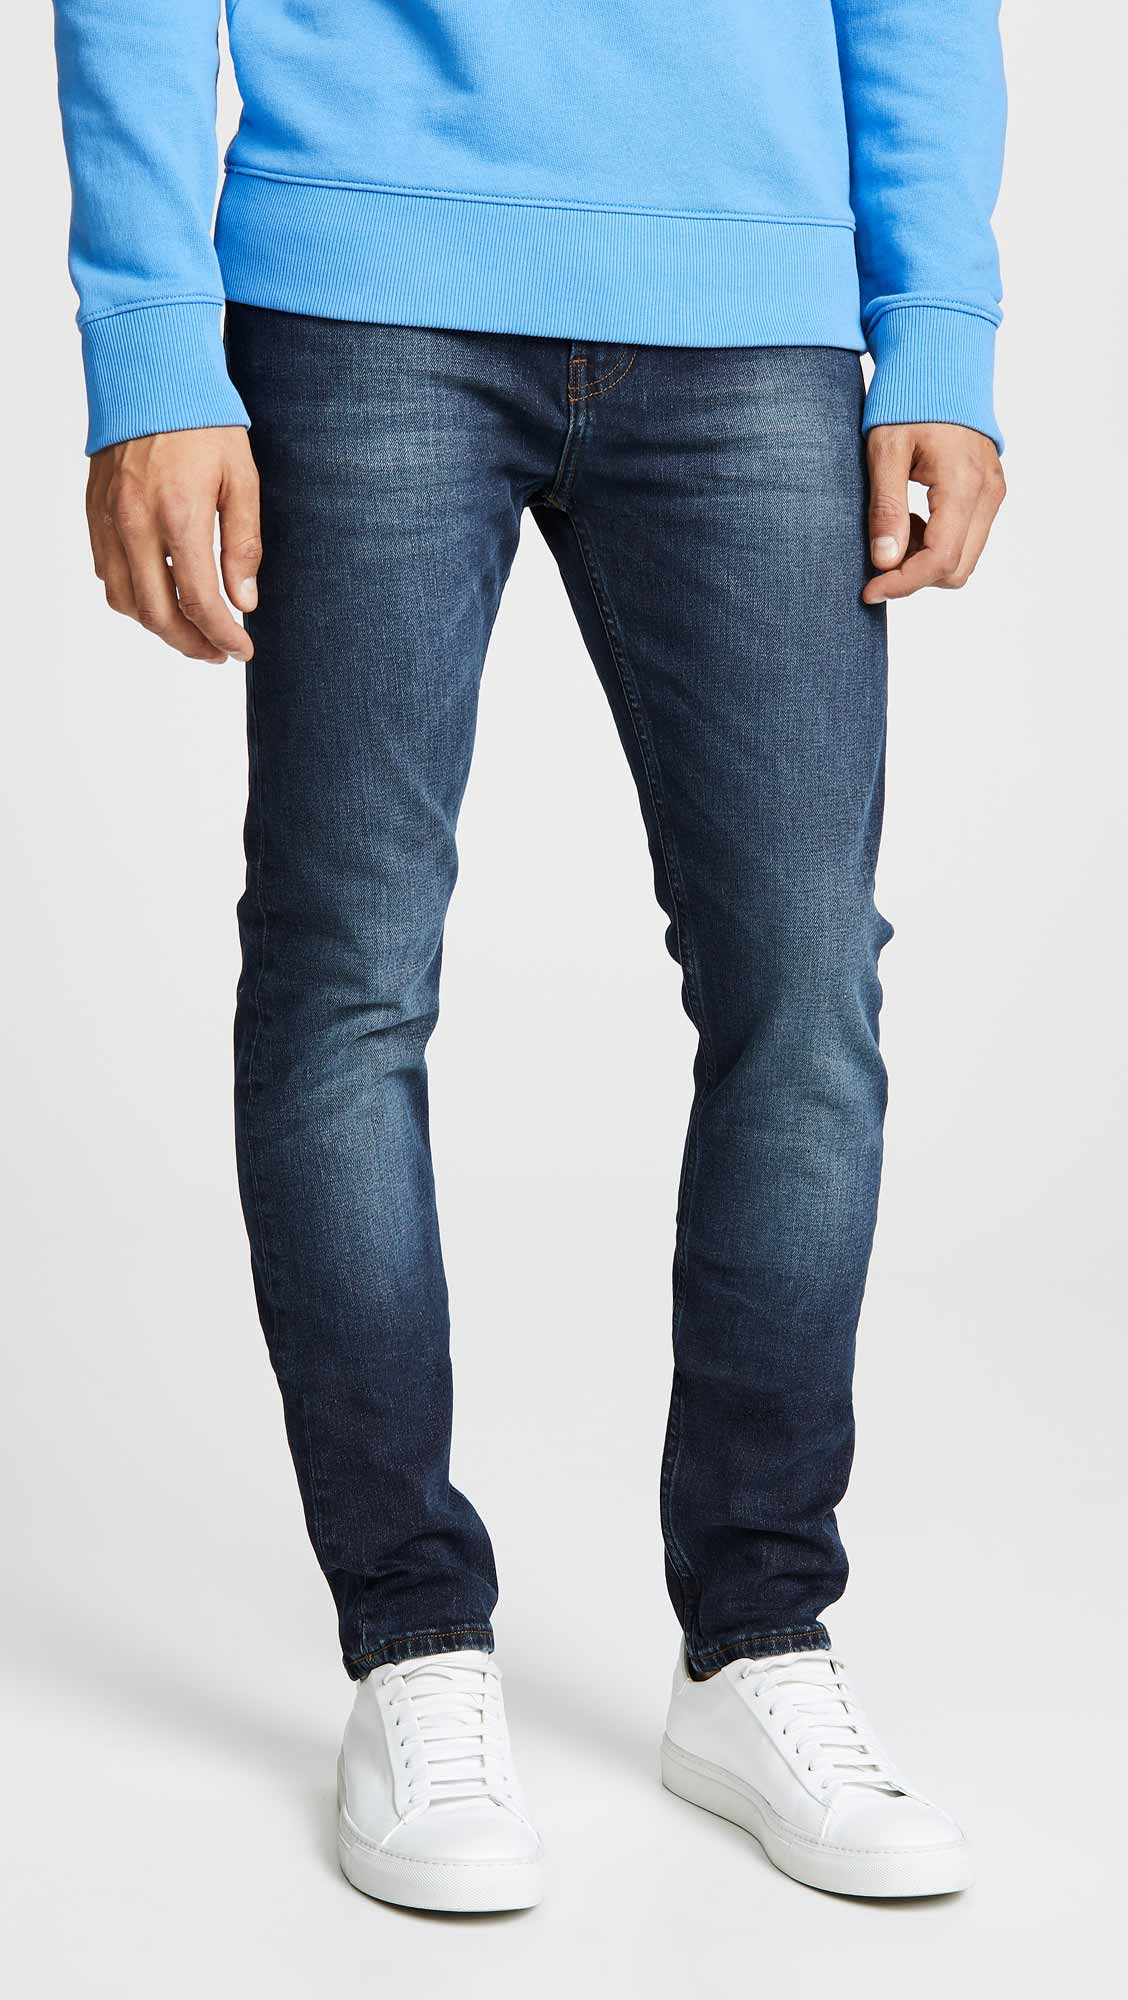 8 Classic Men’s Skinny Jeans For Fall 2018 - THE JEANS BLOG